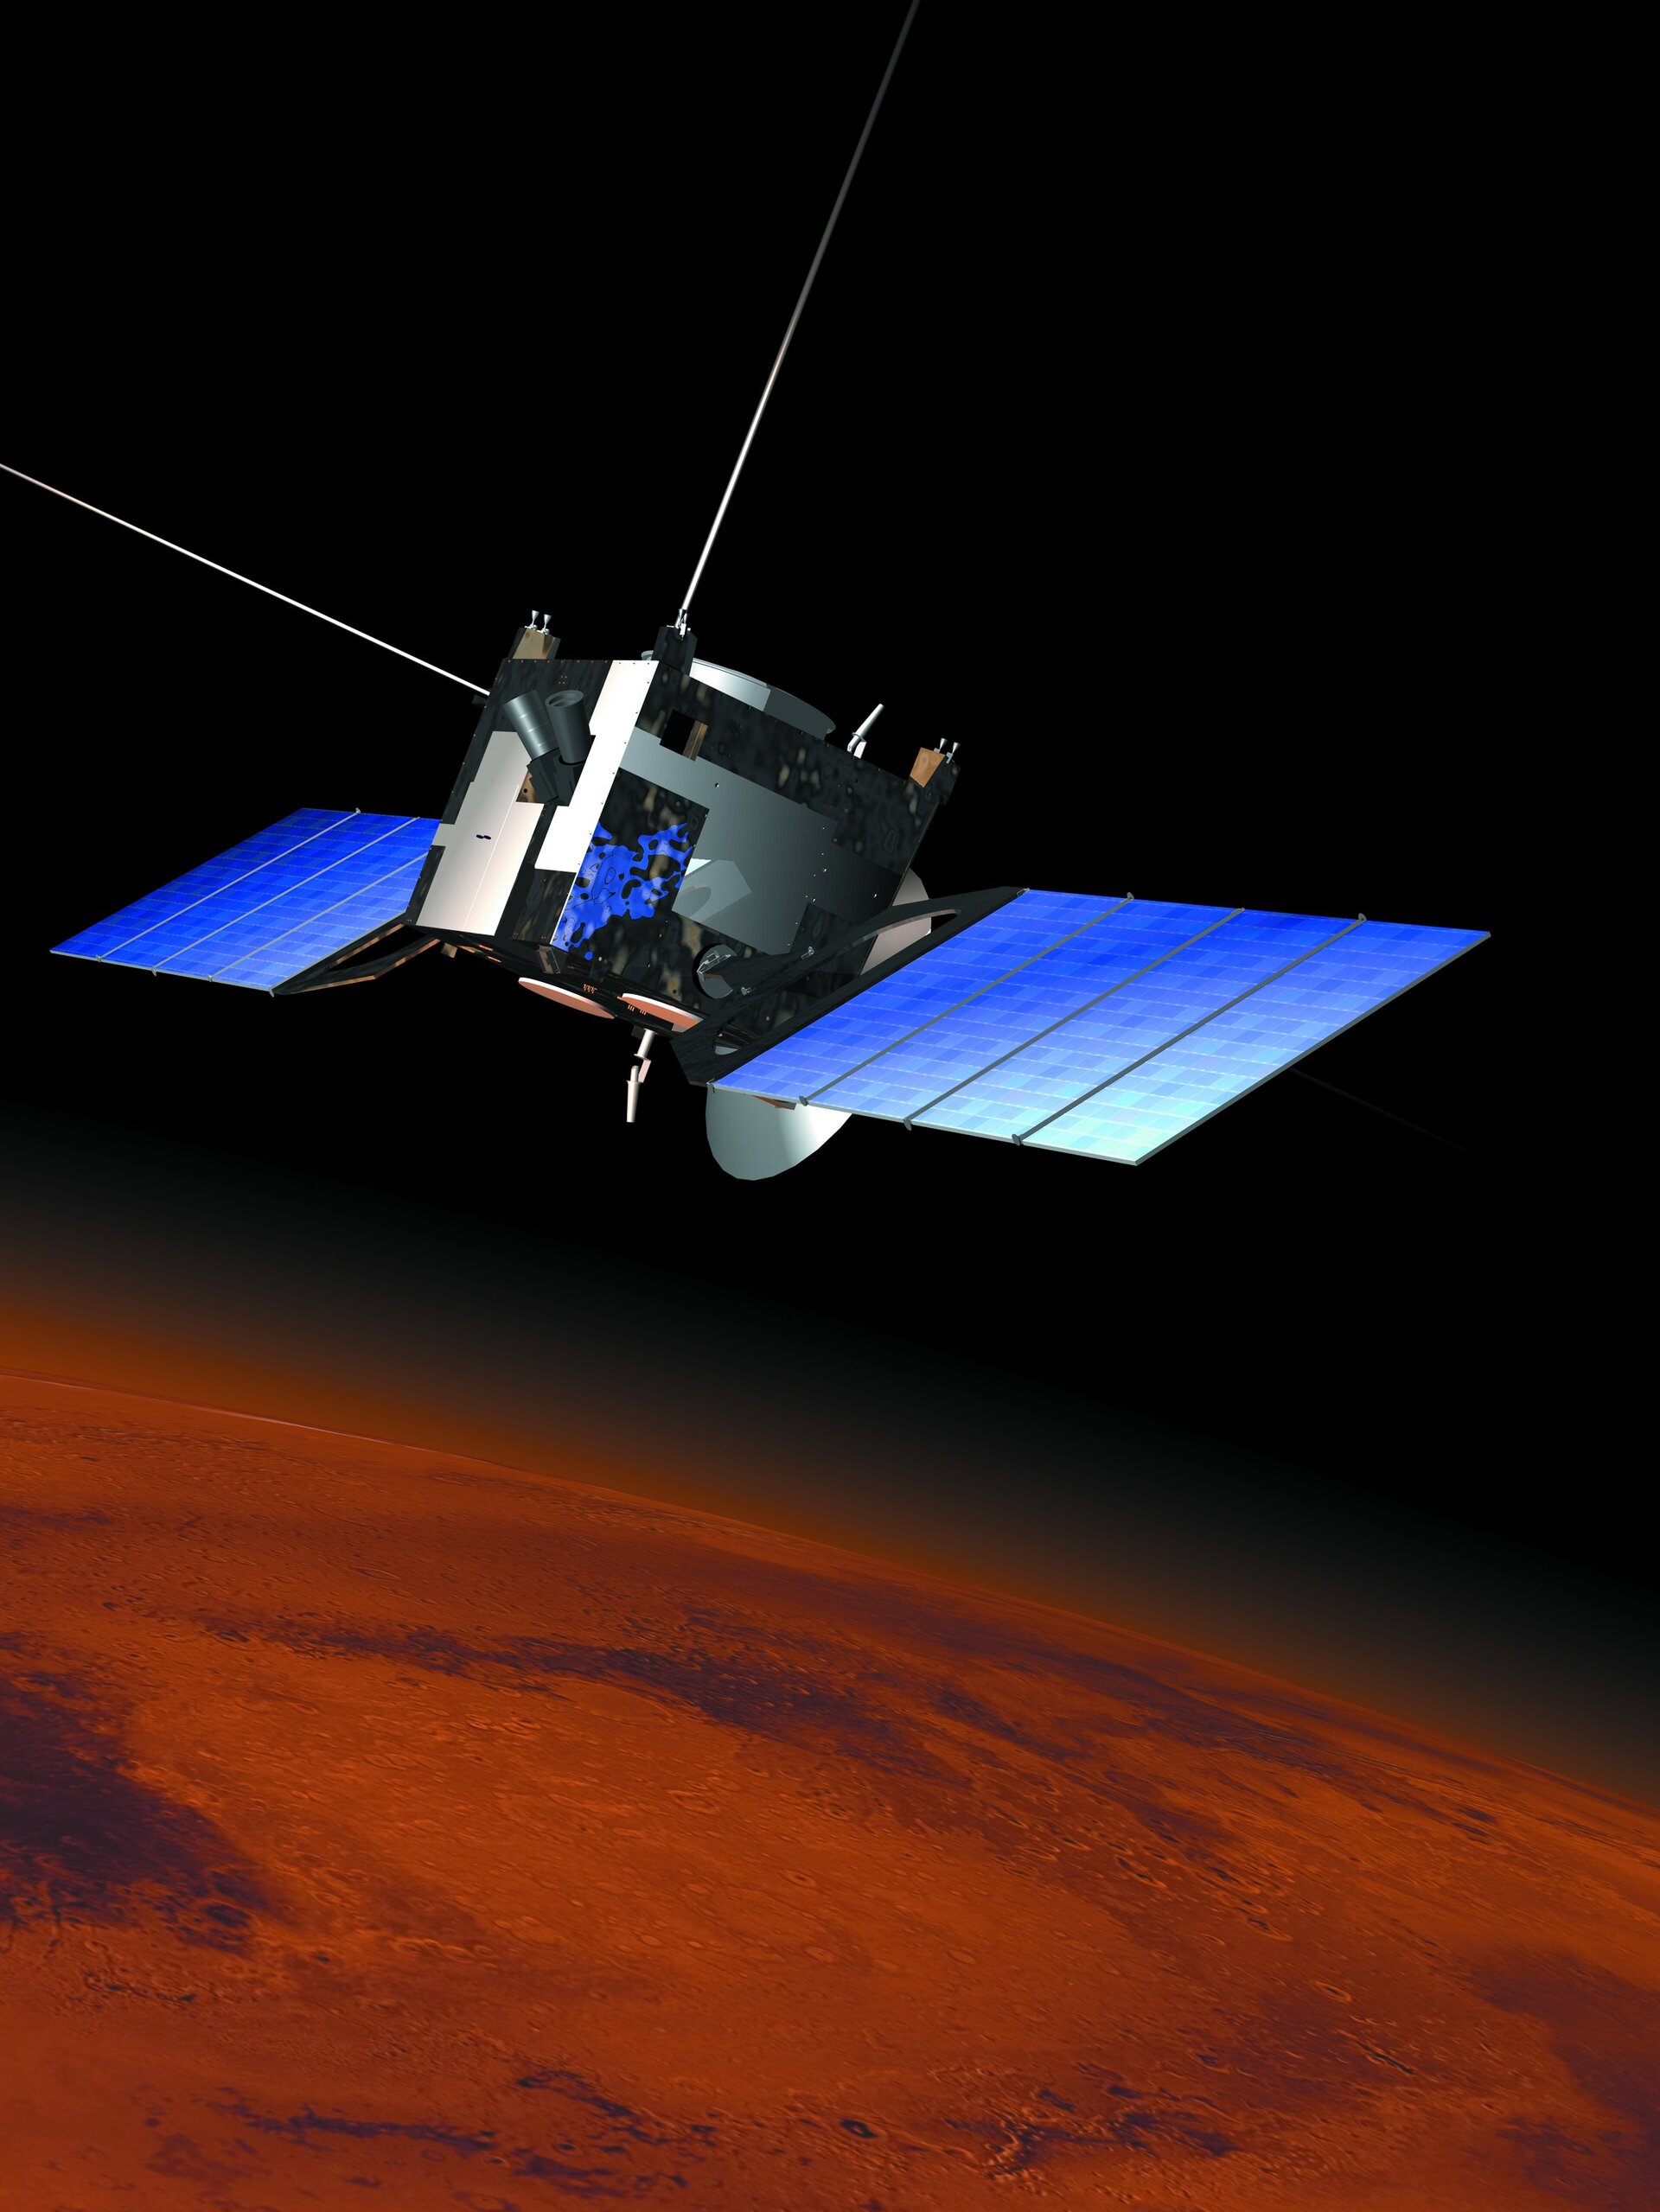 The Mars Express spacecraft after release of the Beagle 2 lander